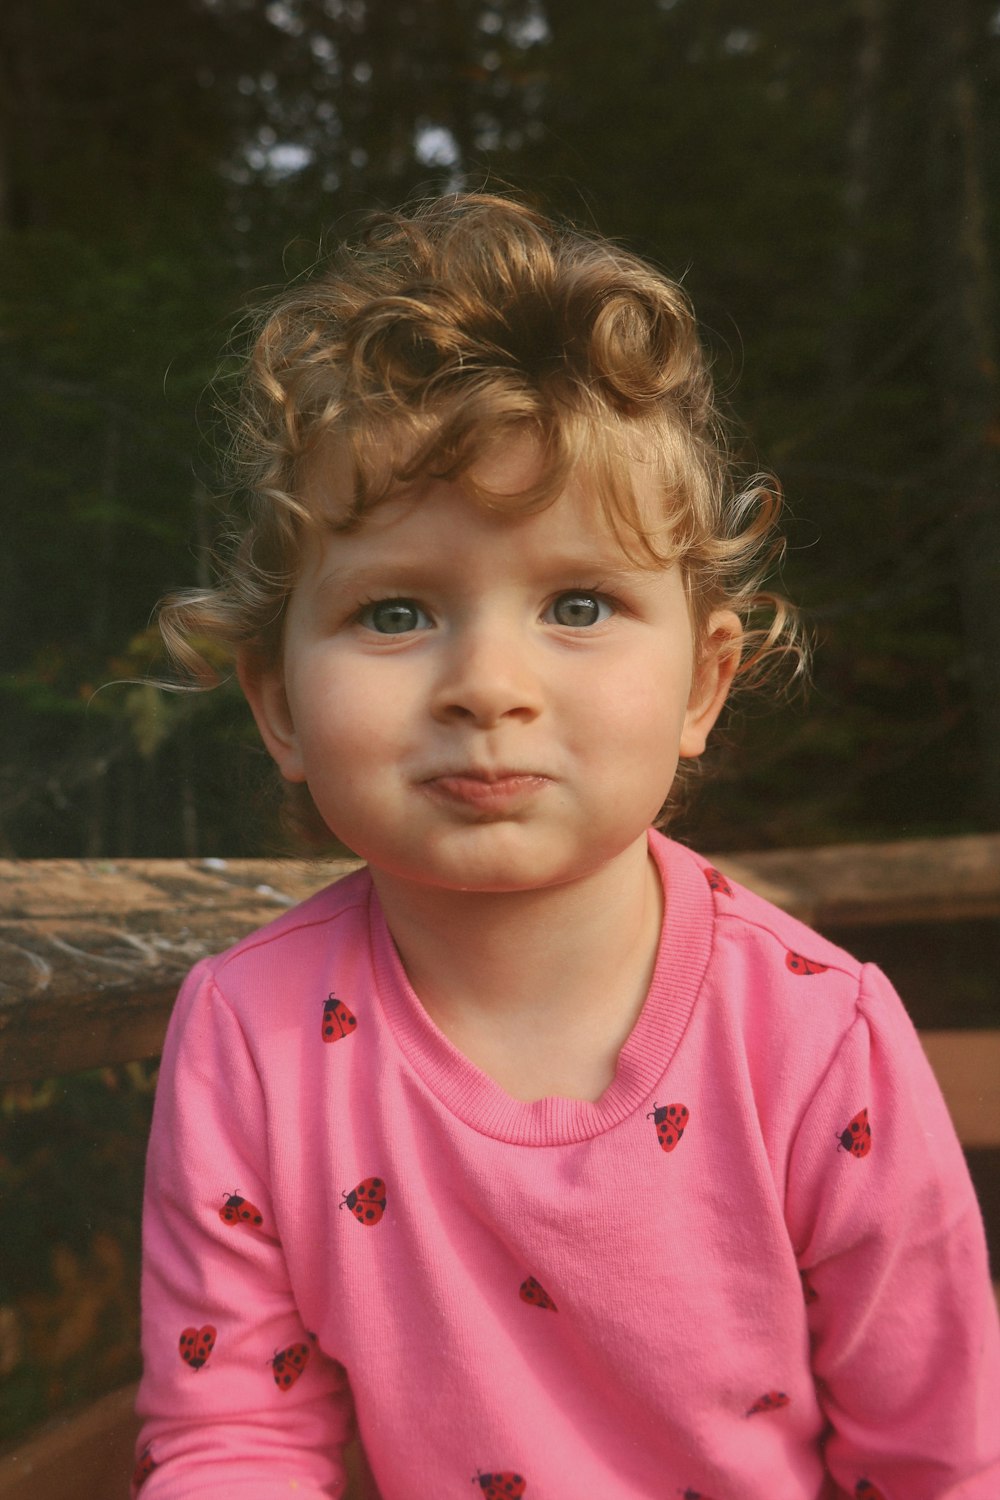 a little girl in a pink shirt sitting on a bench